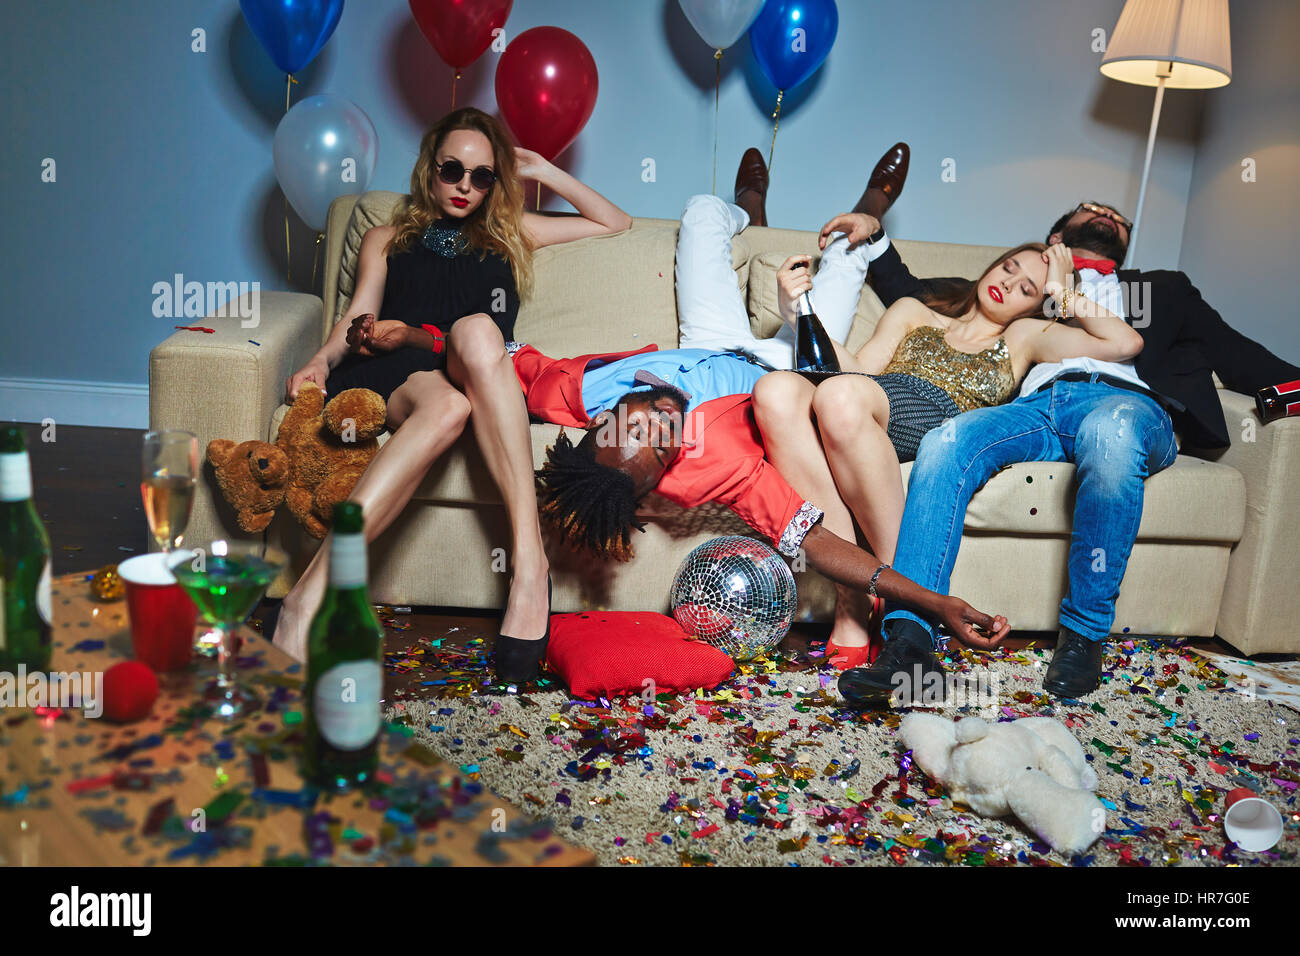 Messy room after wild house party, three tipsy stylish friends relaxing on couch while blond-haired woman with teddy bear posing for photography Stock Photo